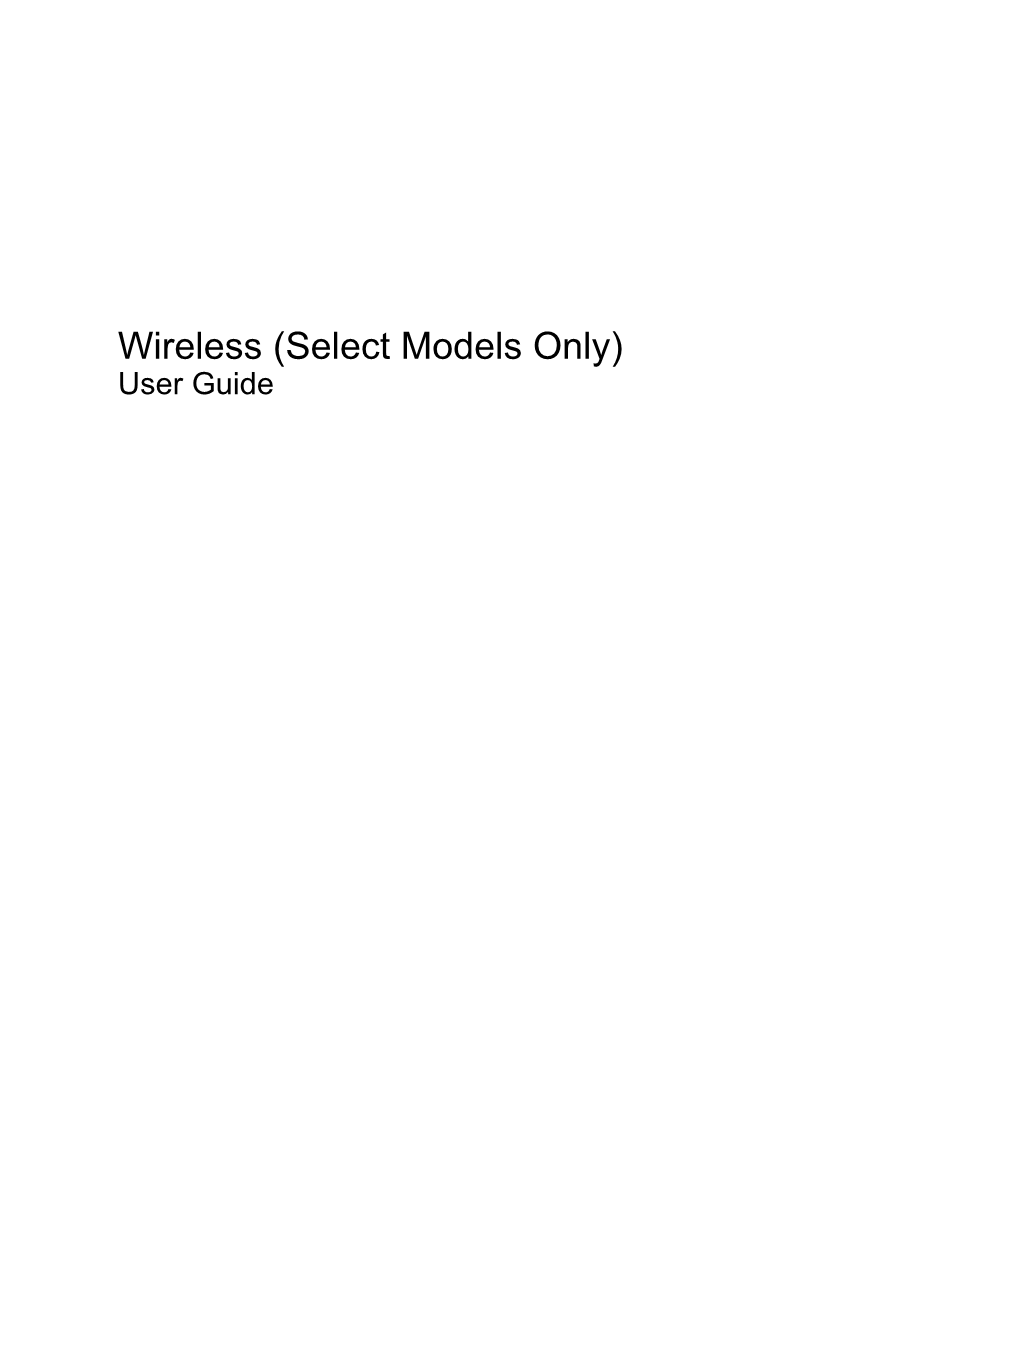 Wireless (Select Models Only) User Guide © Copyright 2009 Hewlett-Packard Product Notice Development Company, L.P